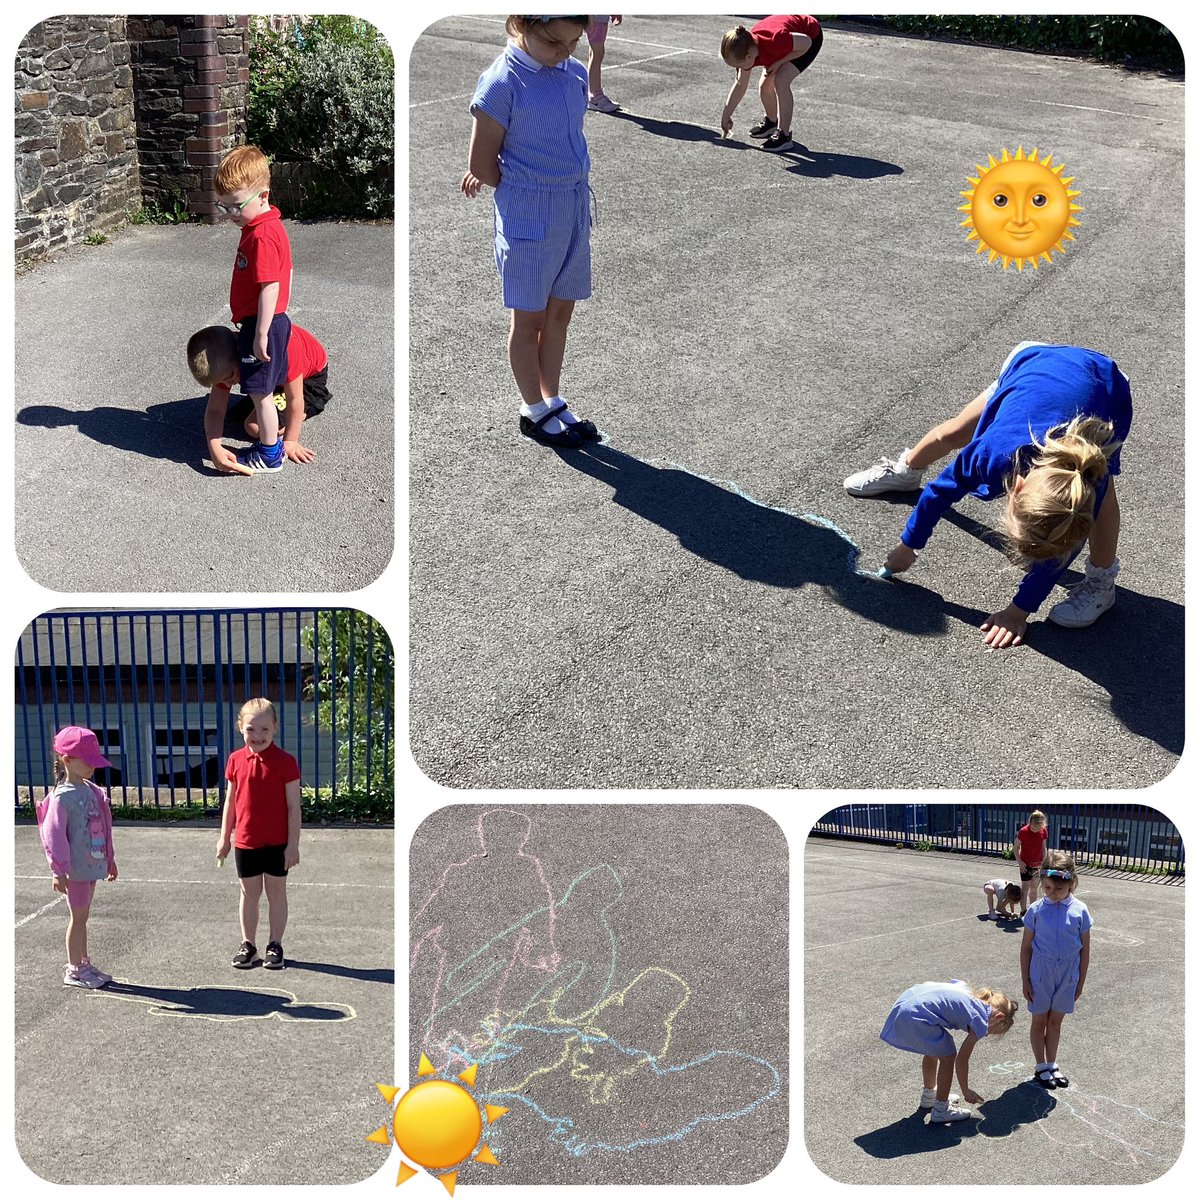 Today we have been looking at shadows. We stood on the same spot at different times throughout the day to see how our shadows moved ☀️
@Phip_Primary